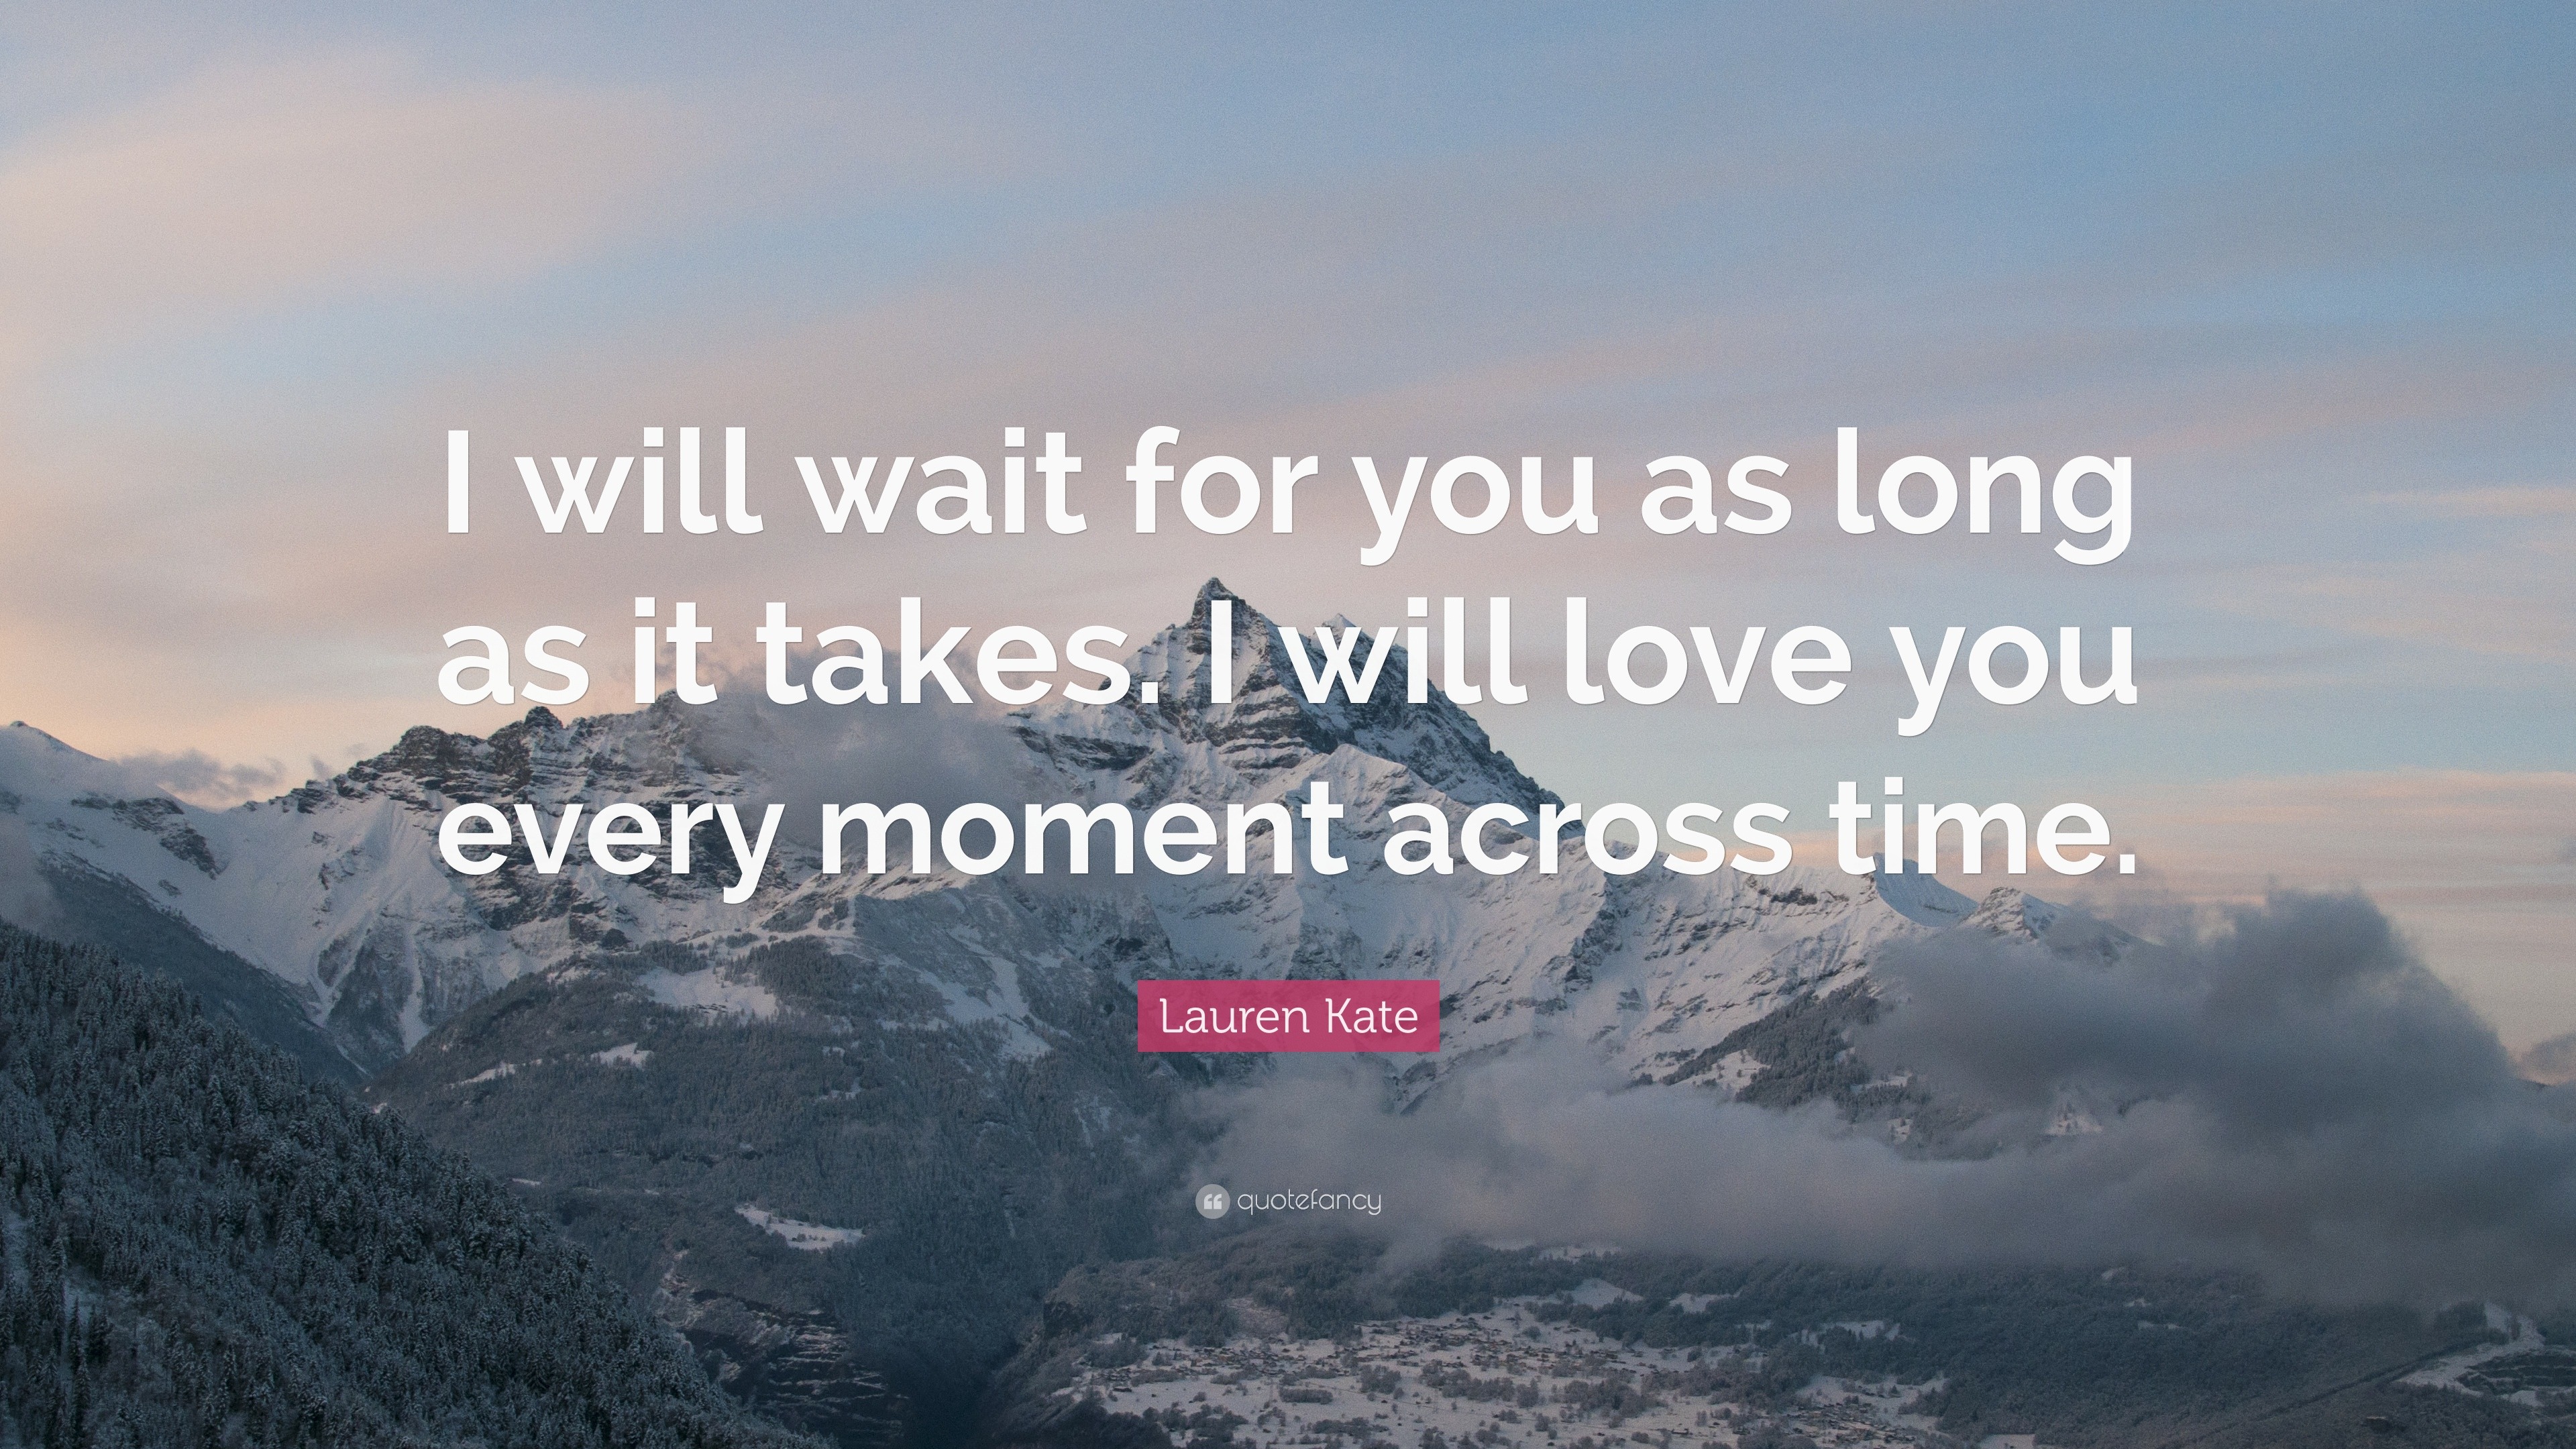 Lauren Kate Quote: “I will wait for you as long as it takes. I will ...